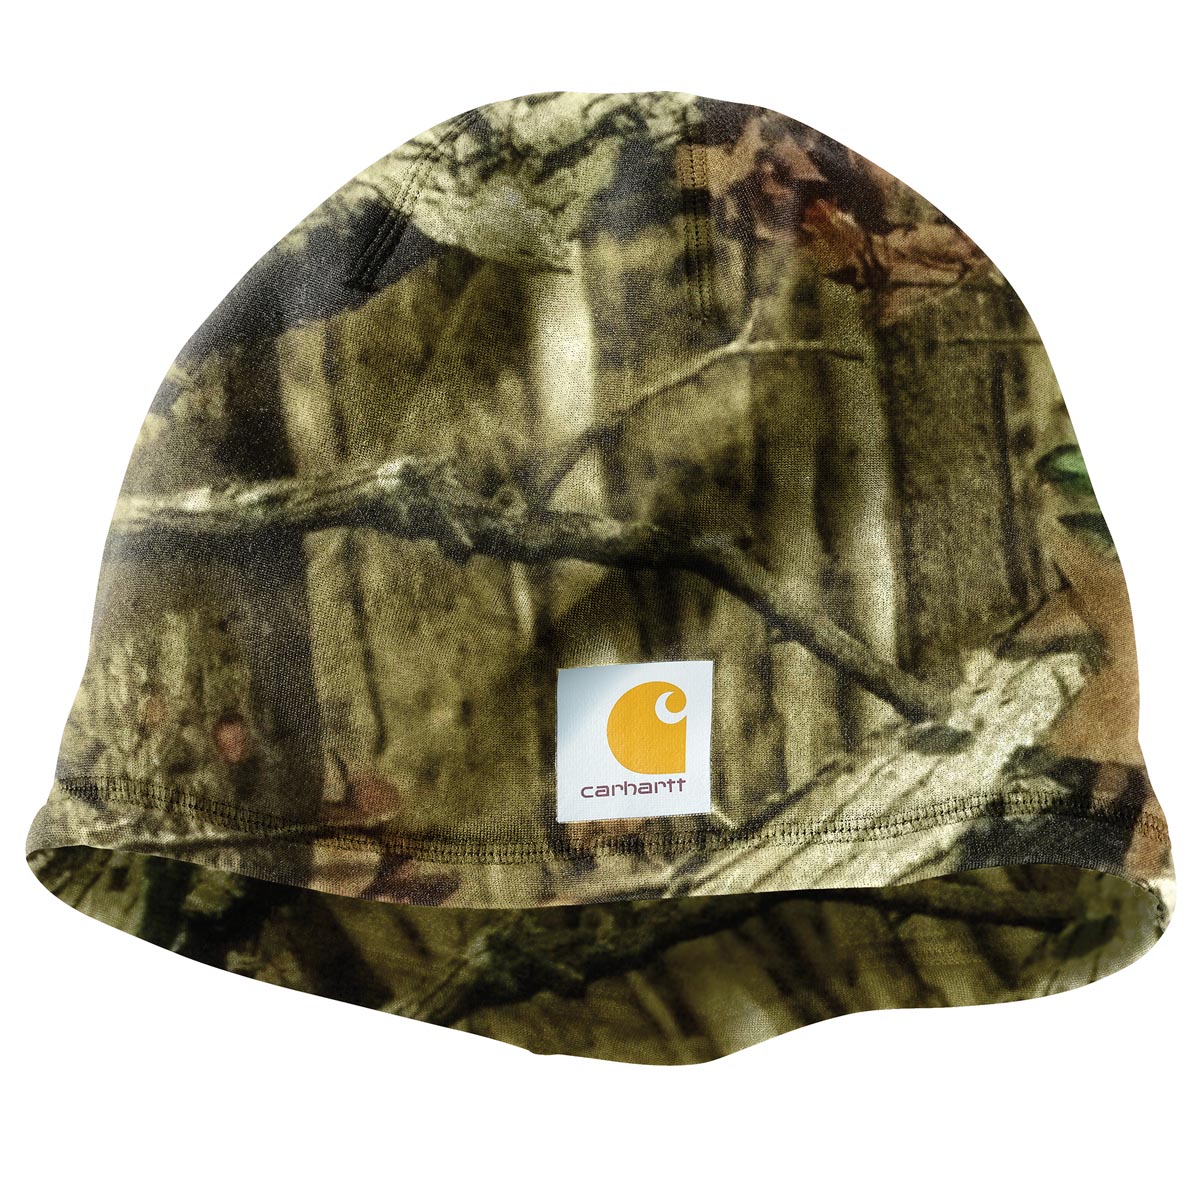 Carhartt Men's Force Lewisville Camo Hat Discontinued Pricing